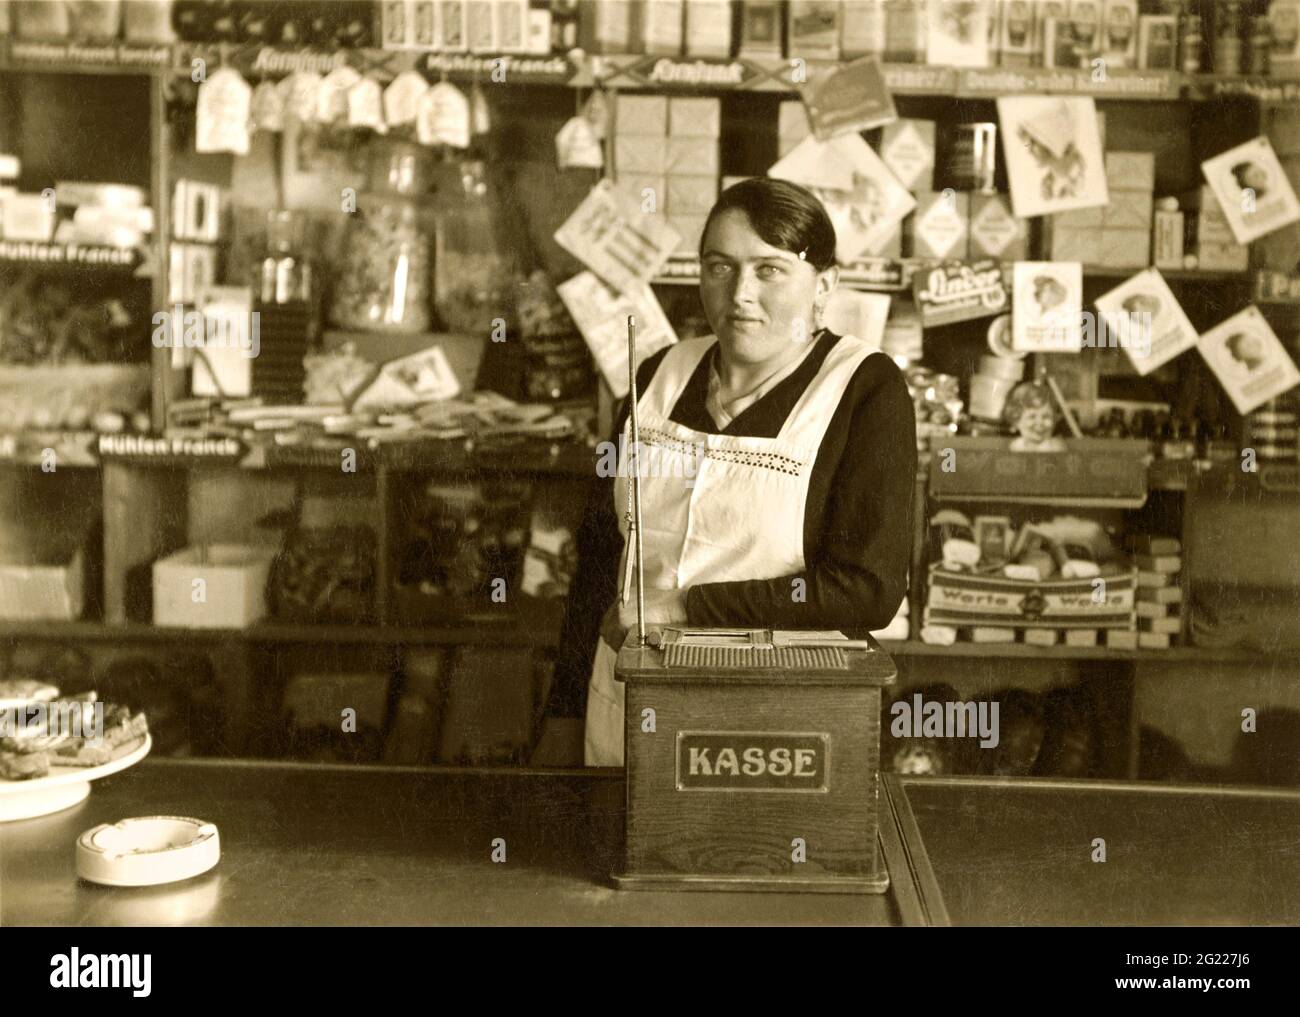 trade, small corner shop, Berlin, Germany, circa 1930, ADDITIONAL-RIGHTS-CLEARANCE-INFO-NOT-AVAILABLE Stock Photo